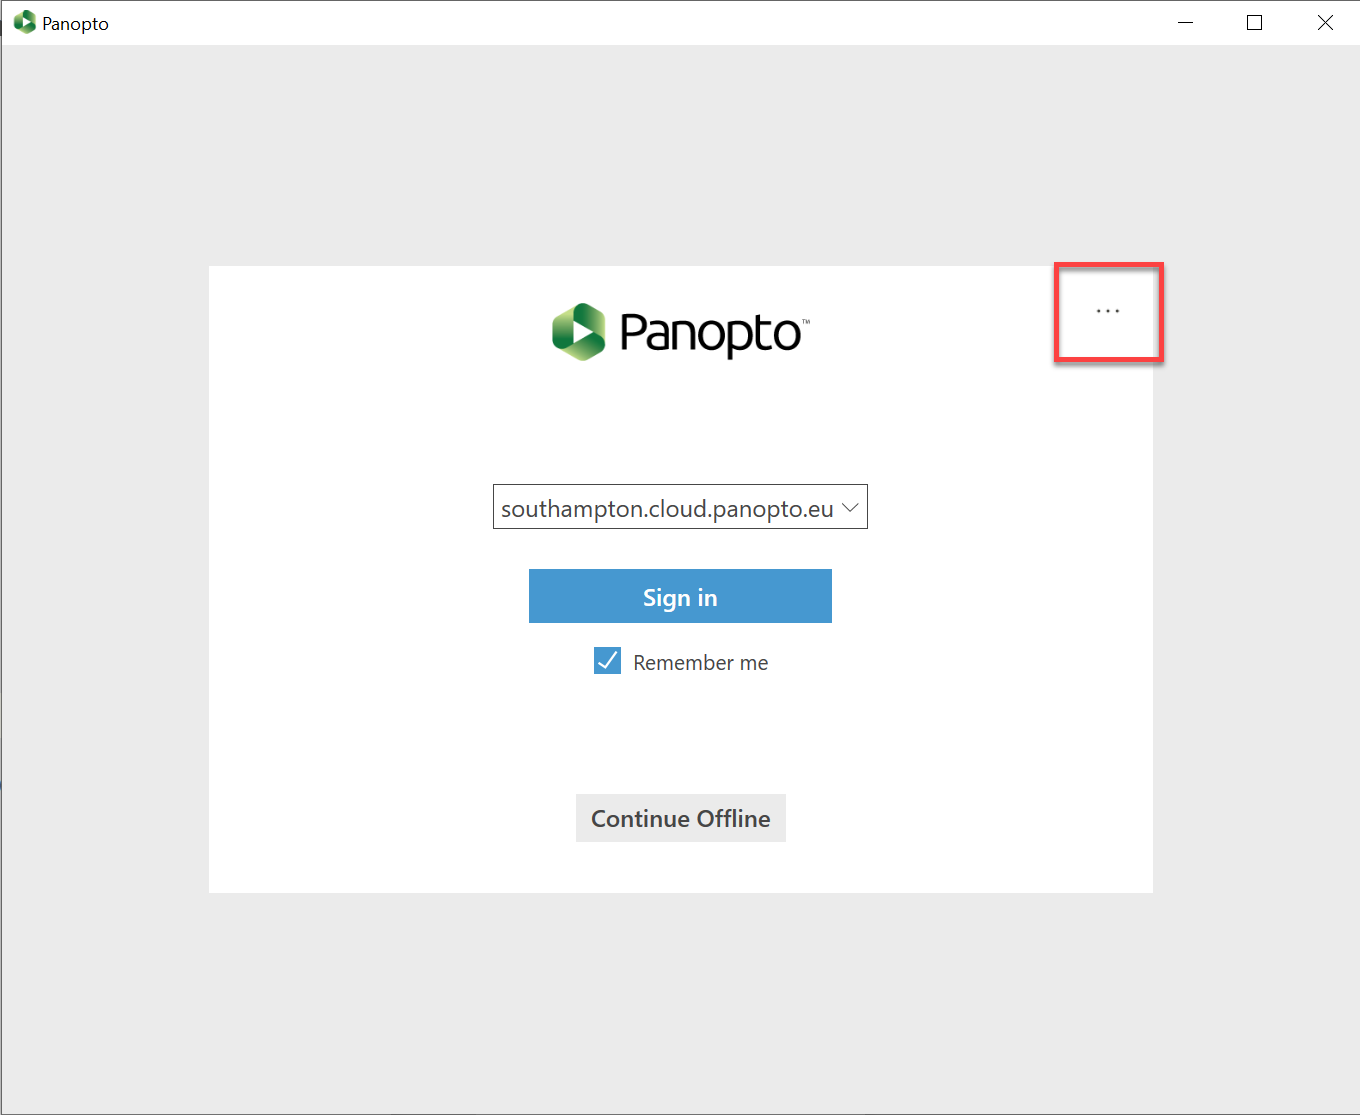 Showing the Panopto recorder interface that is not signed in. It is asking for details to be signed in.